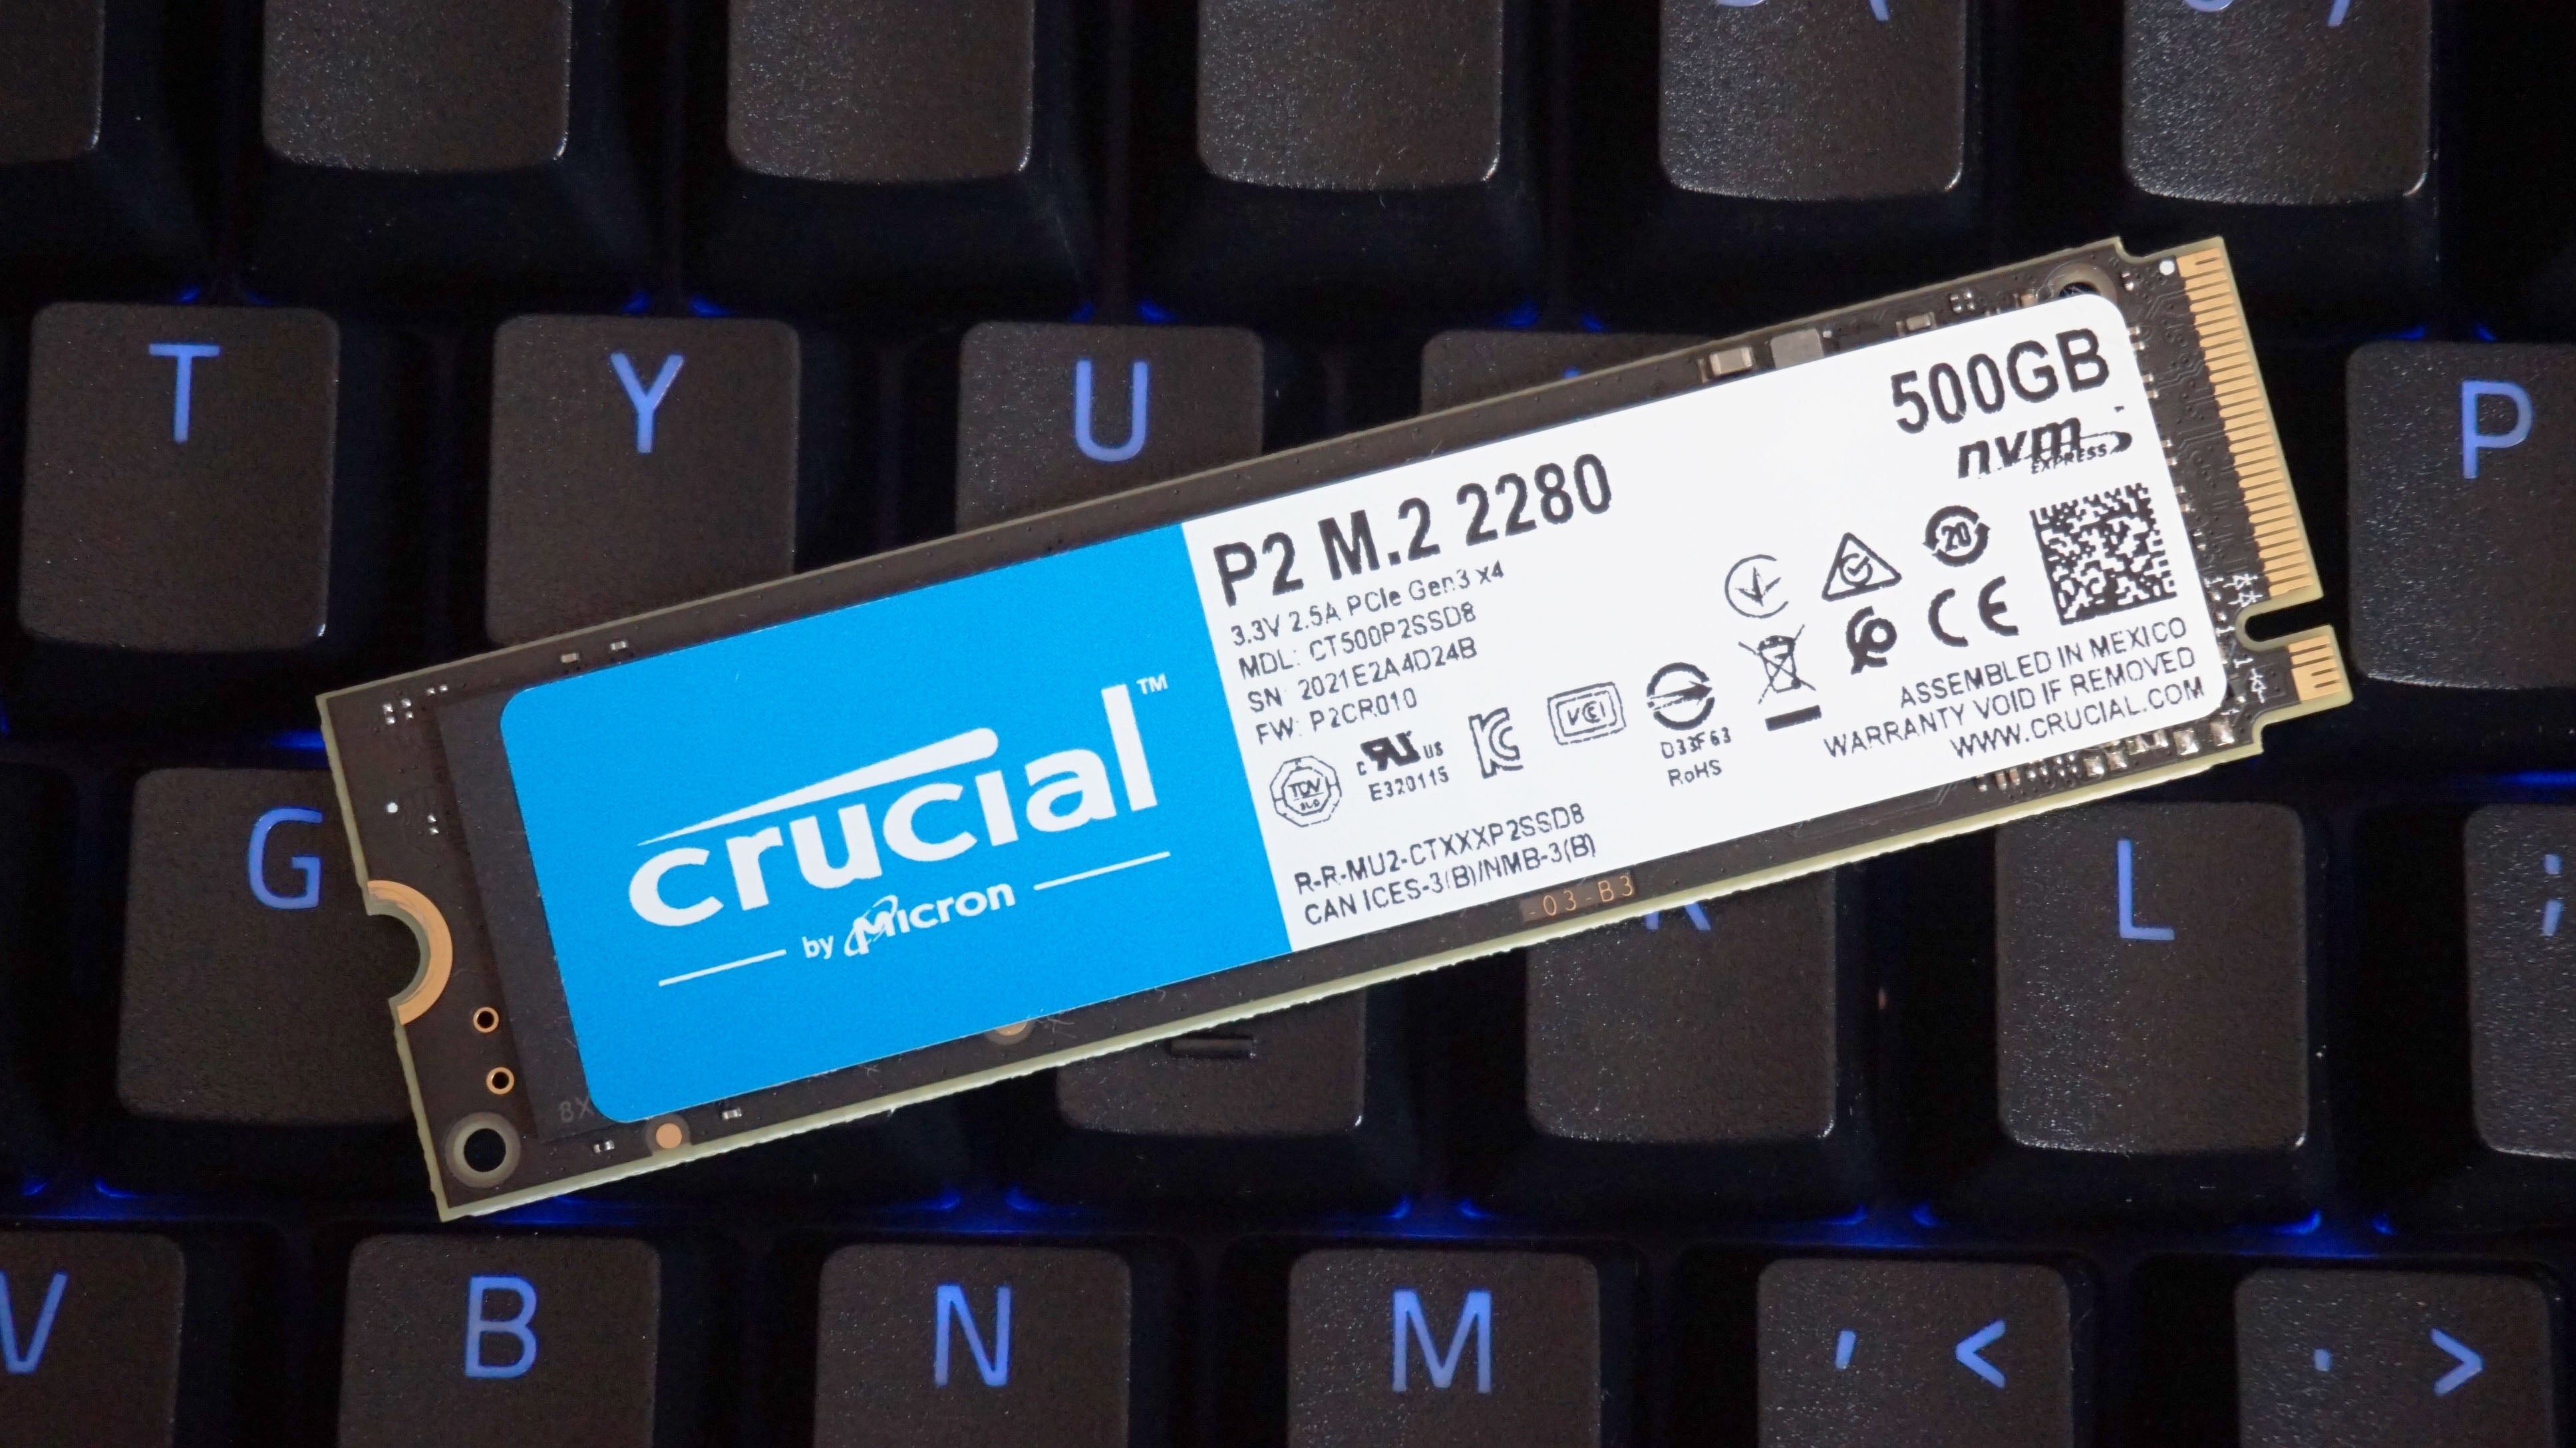 The Crucial P2 SSD